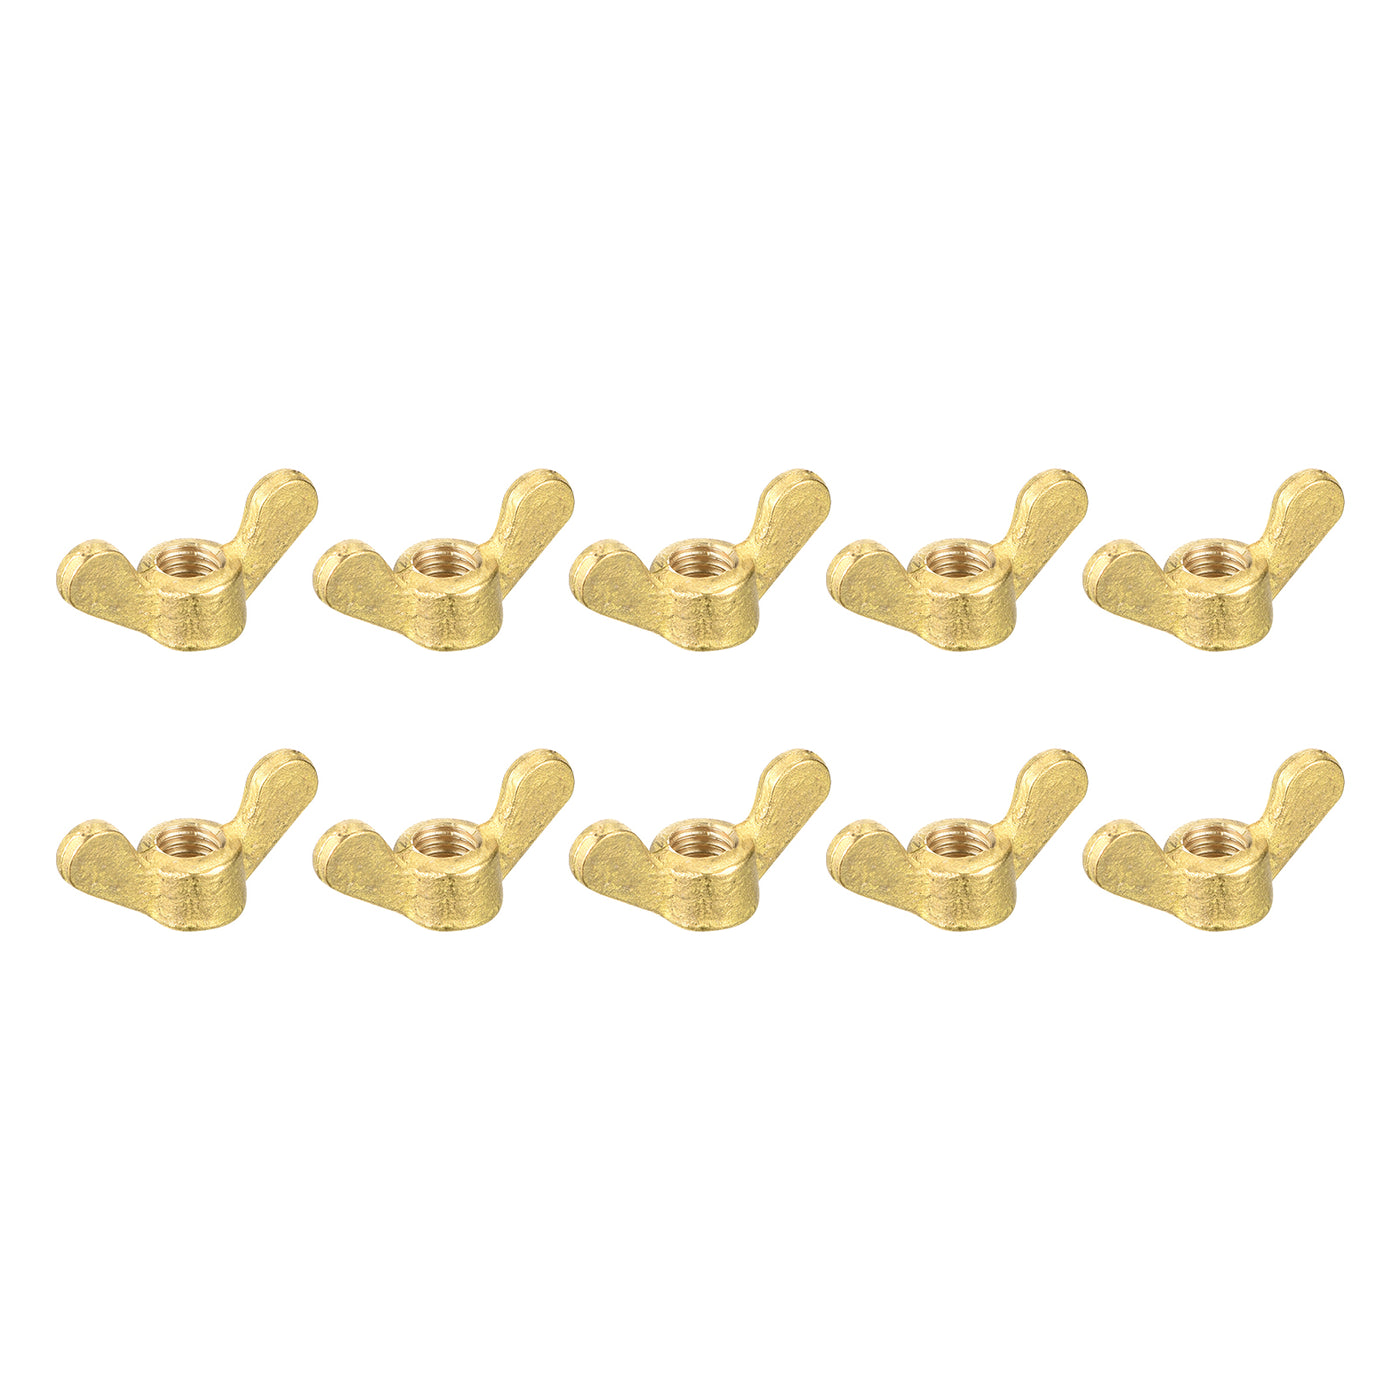 uxcell Uxcell Brass Wing Nuts, M8 Butterfly Nut Hand Twist Tighten Fasteners for Furniture, Machinery, Electronic Equipment, 10Pcs